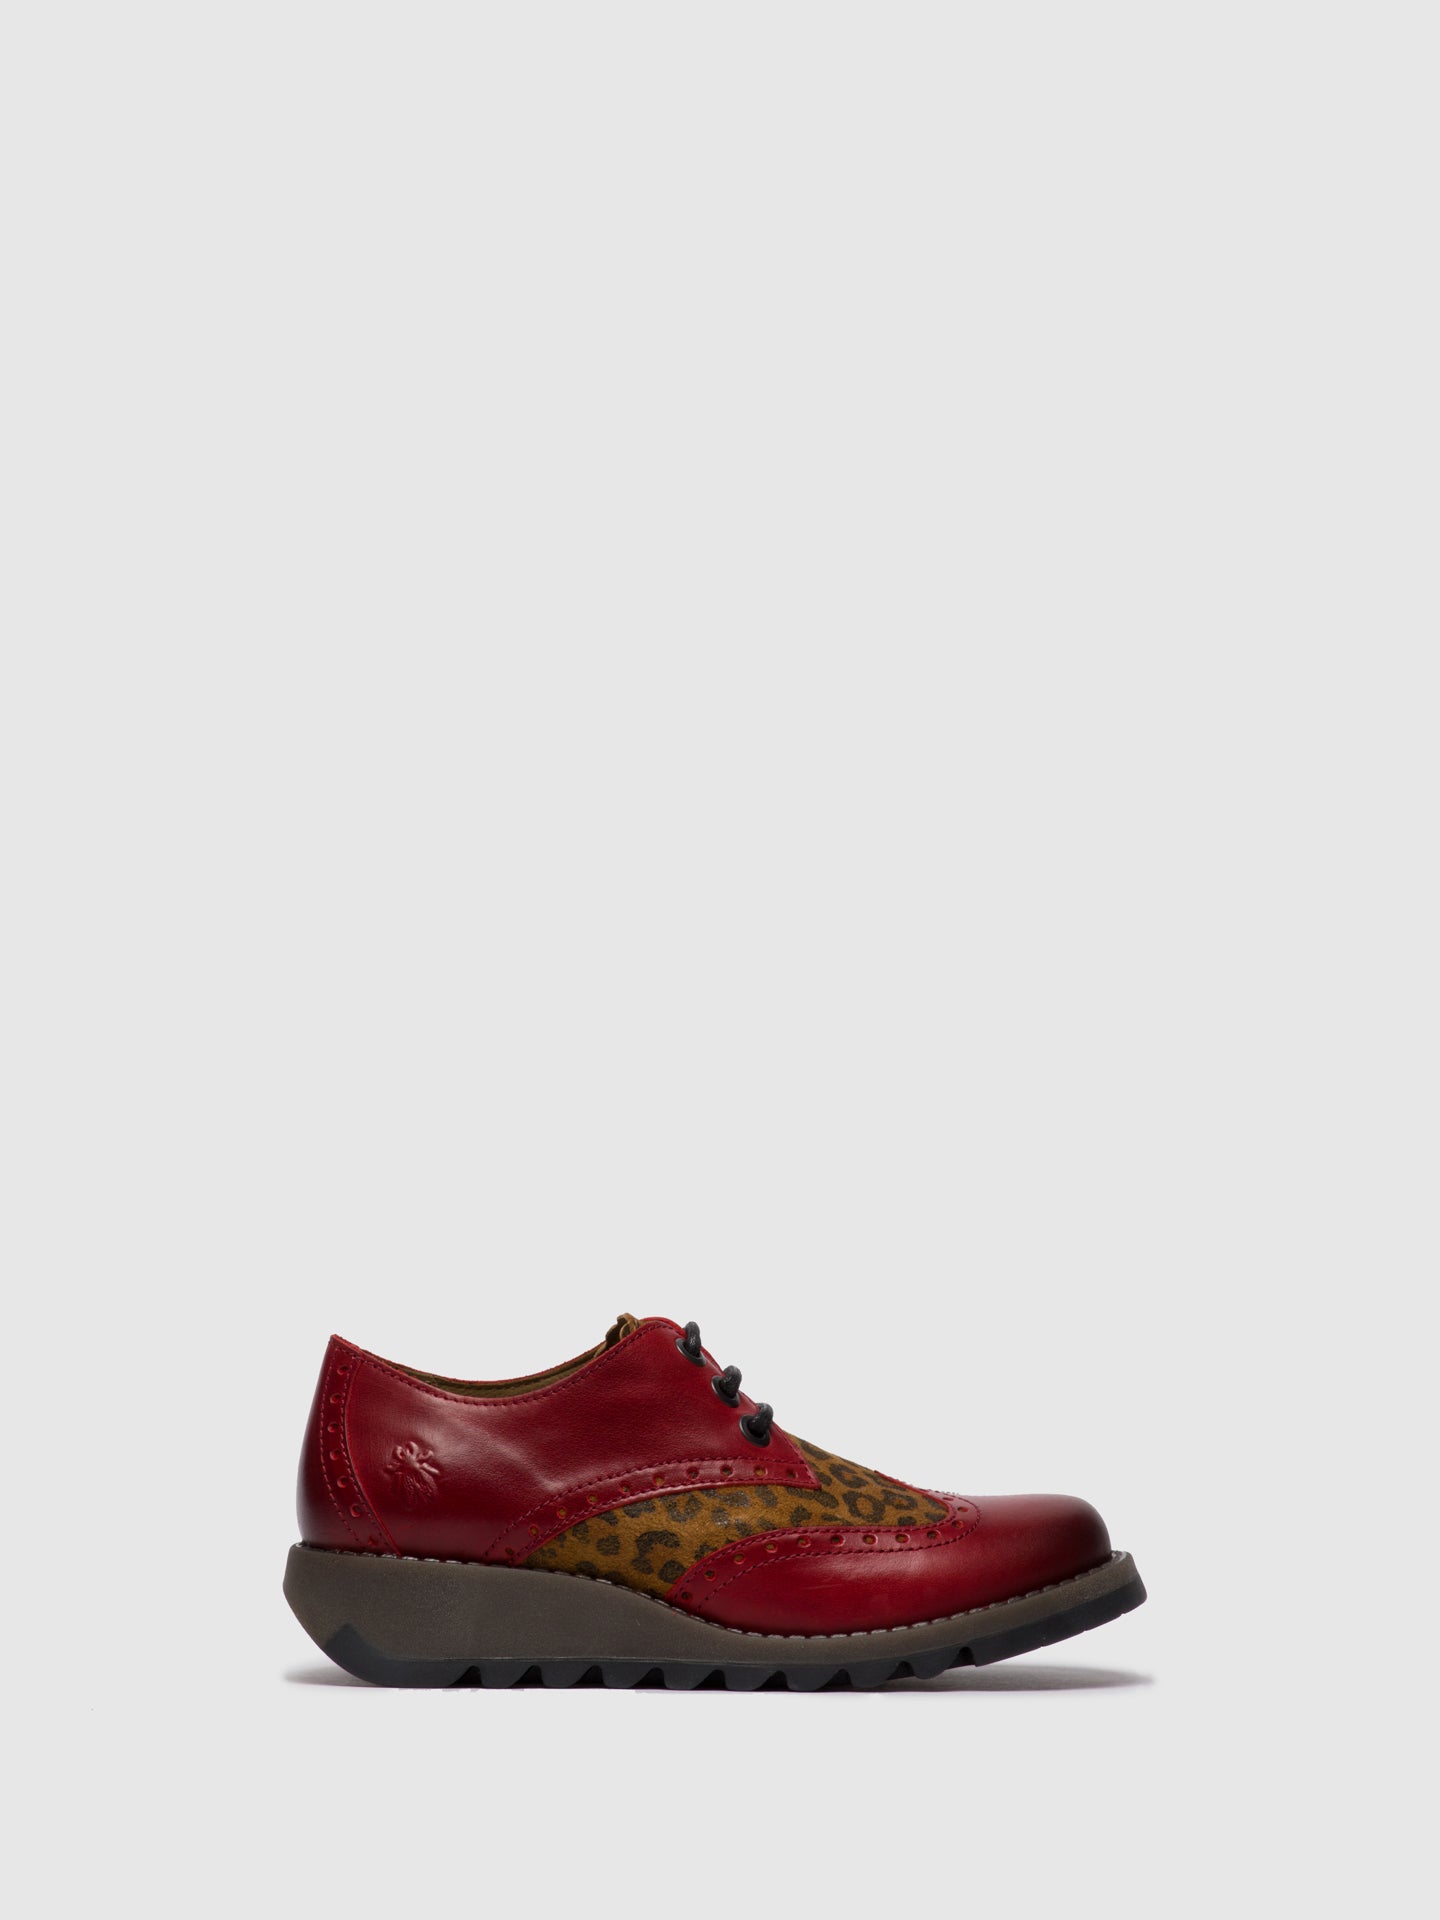 Fly London Oxford Shoes SUME524FLY RUG/CHEETAH RED/TAN